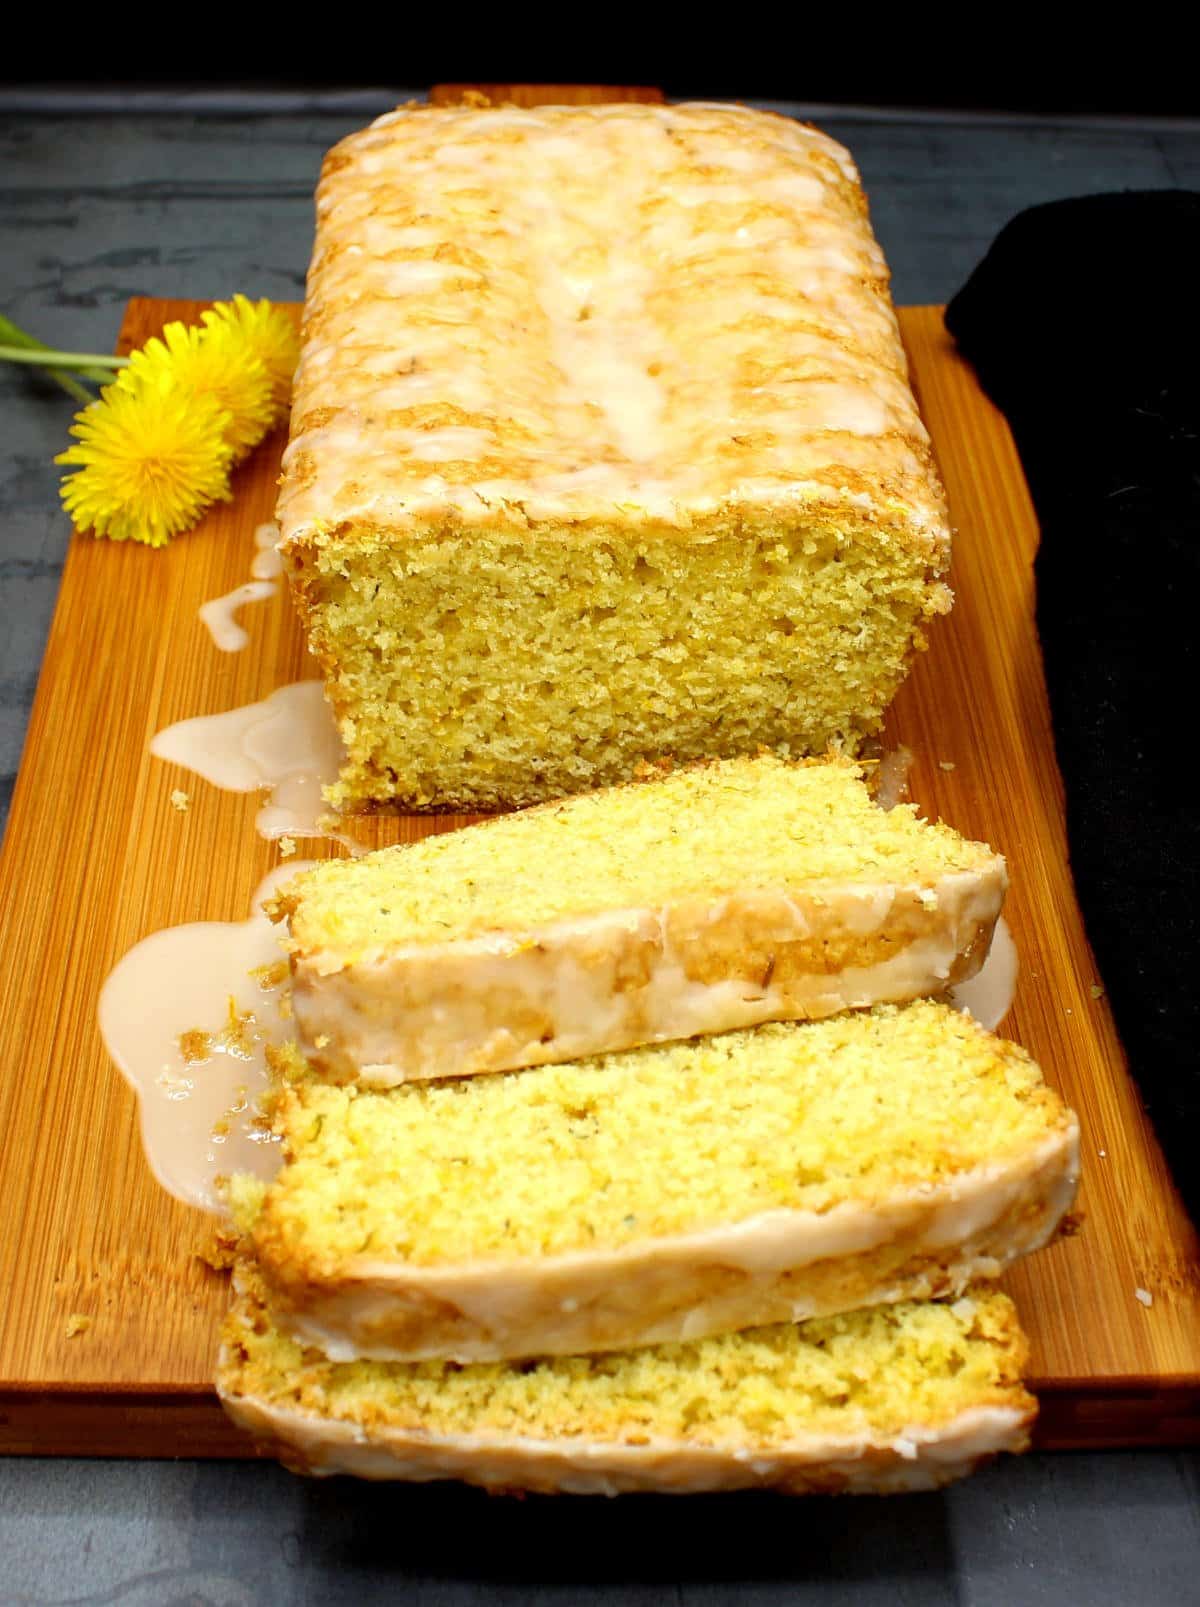 Sliced dandelion bread with lemon glaze on a chopping board with dandelion blossoms on the side.